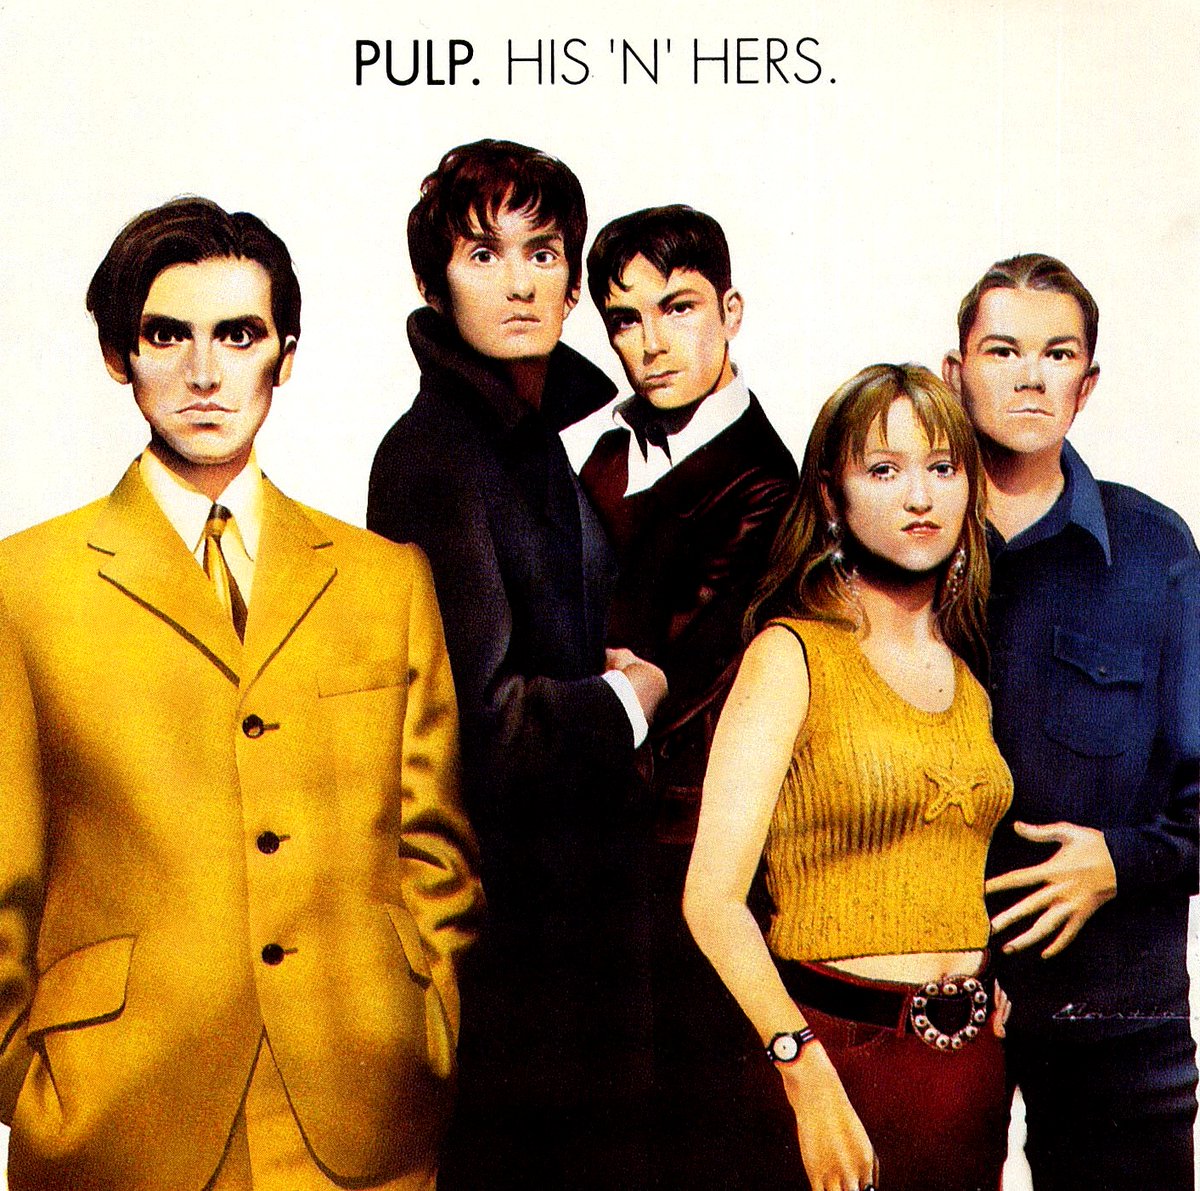 On this day in 1994 @welovepulp released their fourth studio album, His 'n' Hers on @IslandRecords Featuring the singles Lipgloss, Do You Remember the First Time? & The Sisters, it reached number 9 in the UK album charts. Superb album!